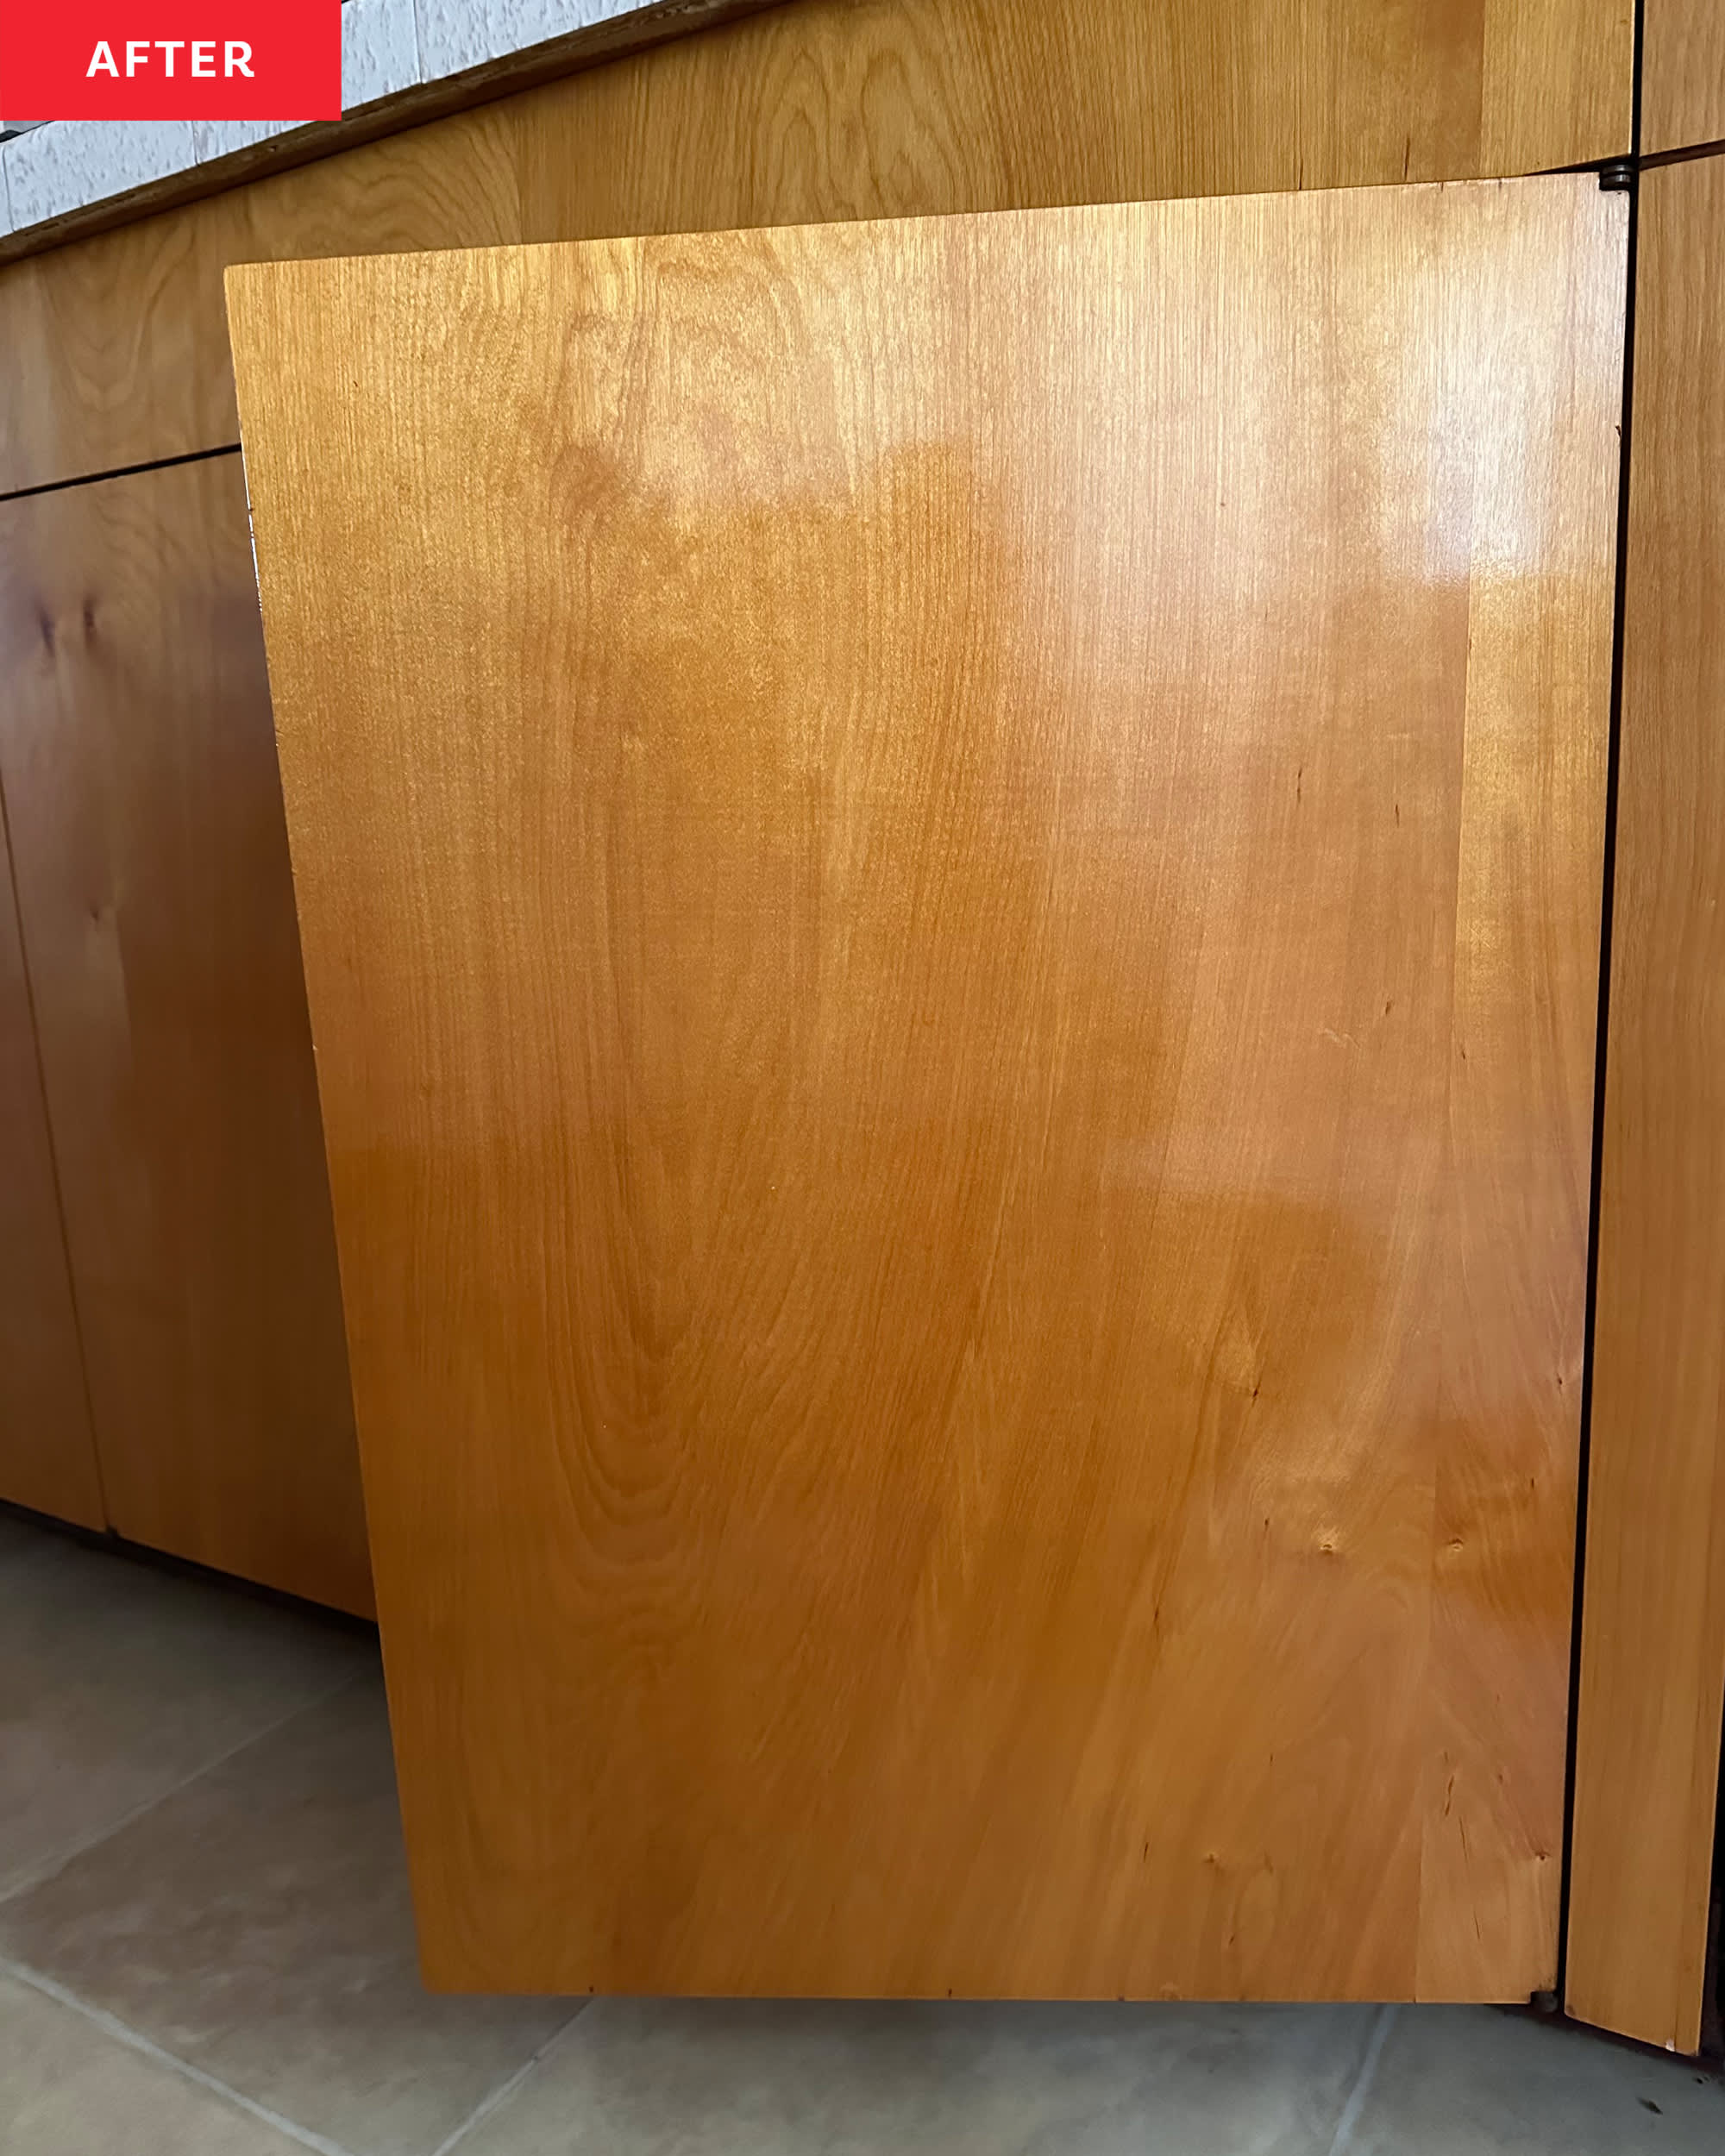 Good Housekeeping's Favorite Cabinet Cleaner Made My Kitchen Glow